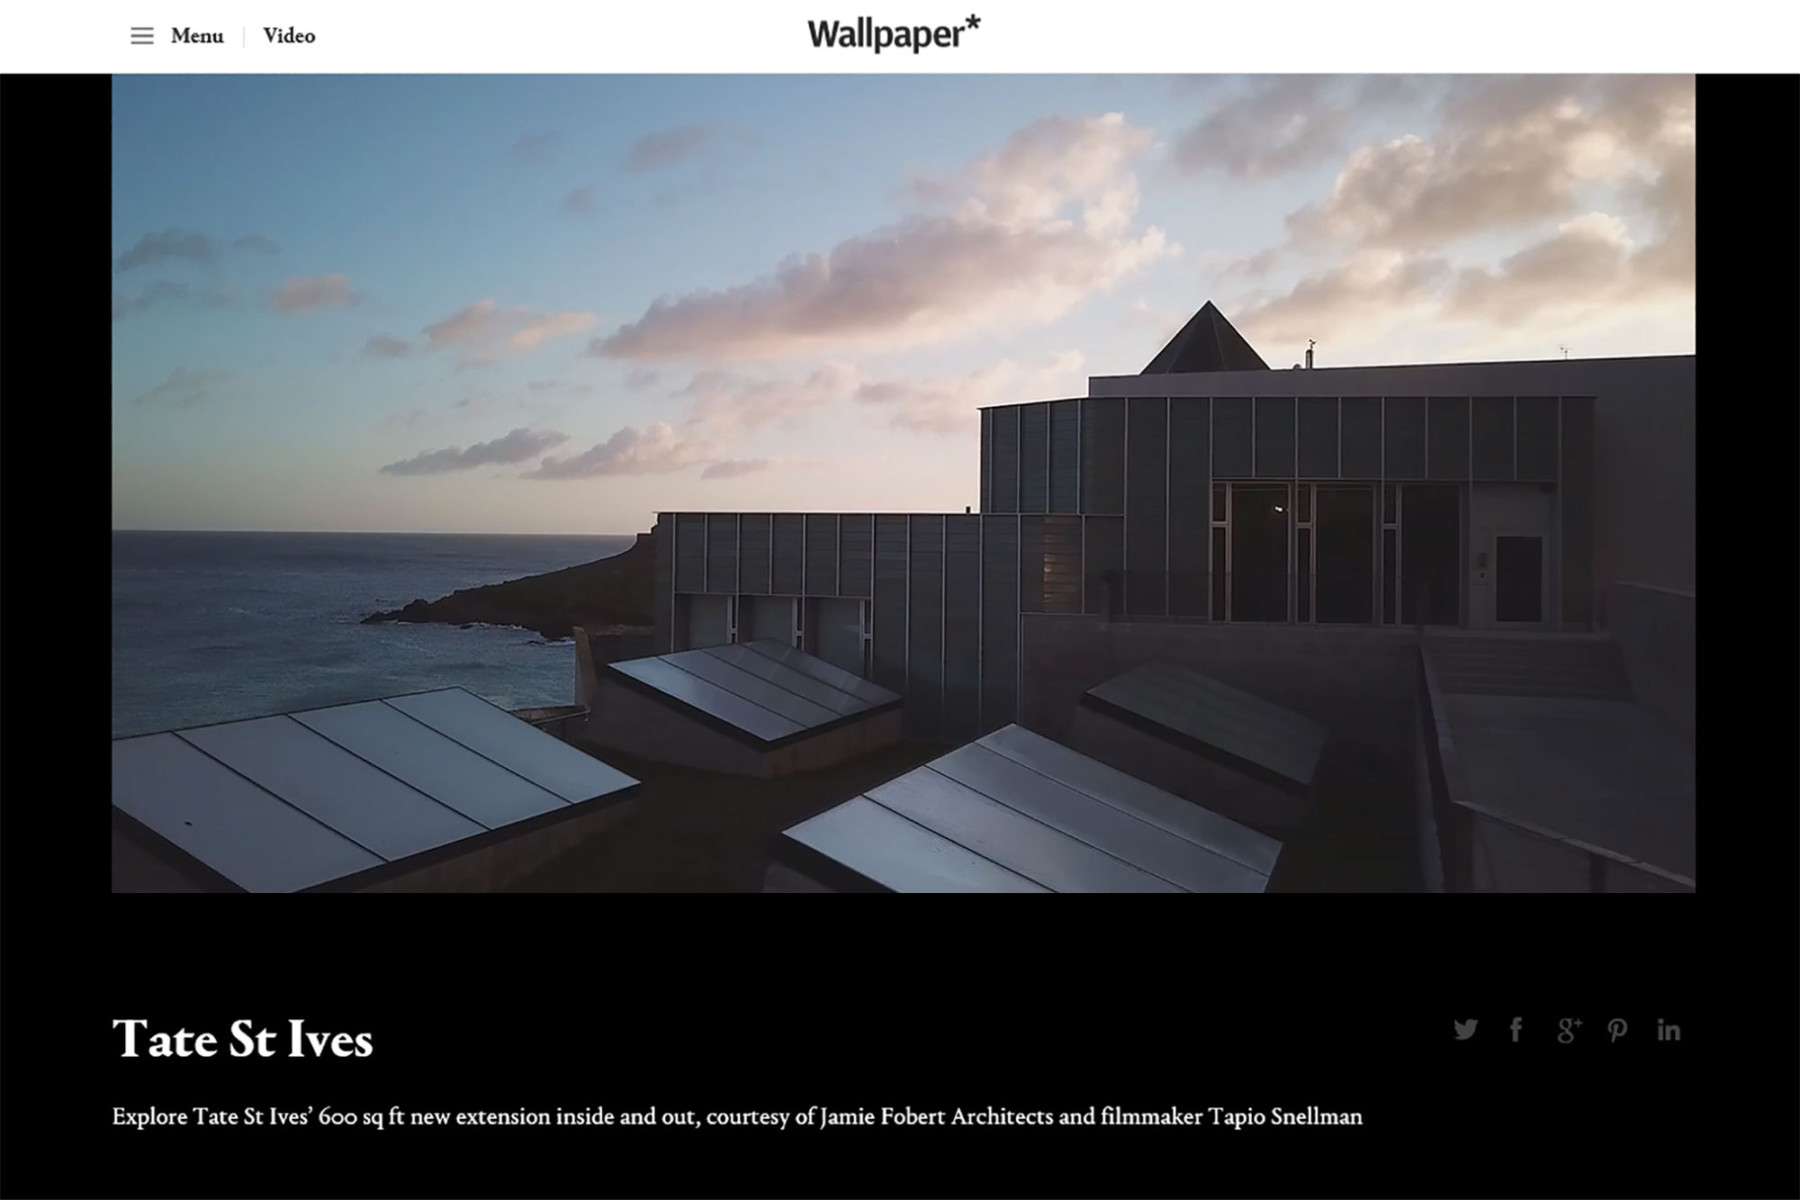 Jamie-Fobert-Architects-Wallpaper-Magazine-Tate-St-Ives-Cultural-Gallery-Modern-Contemporary-Project-Tapio-Snellman-Video